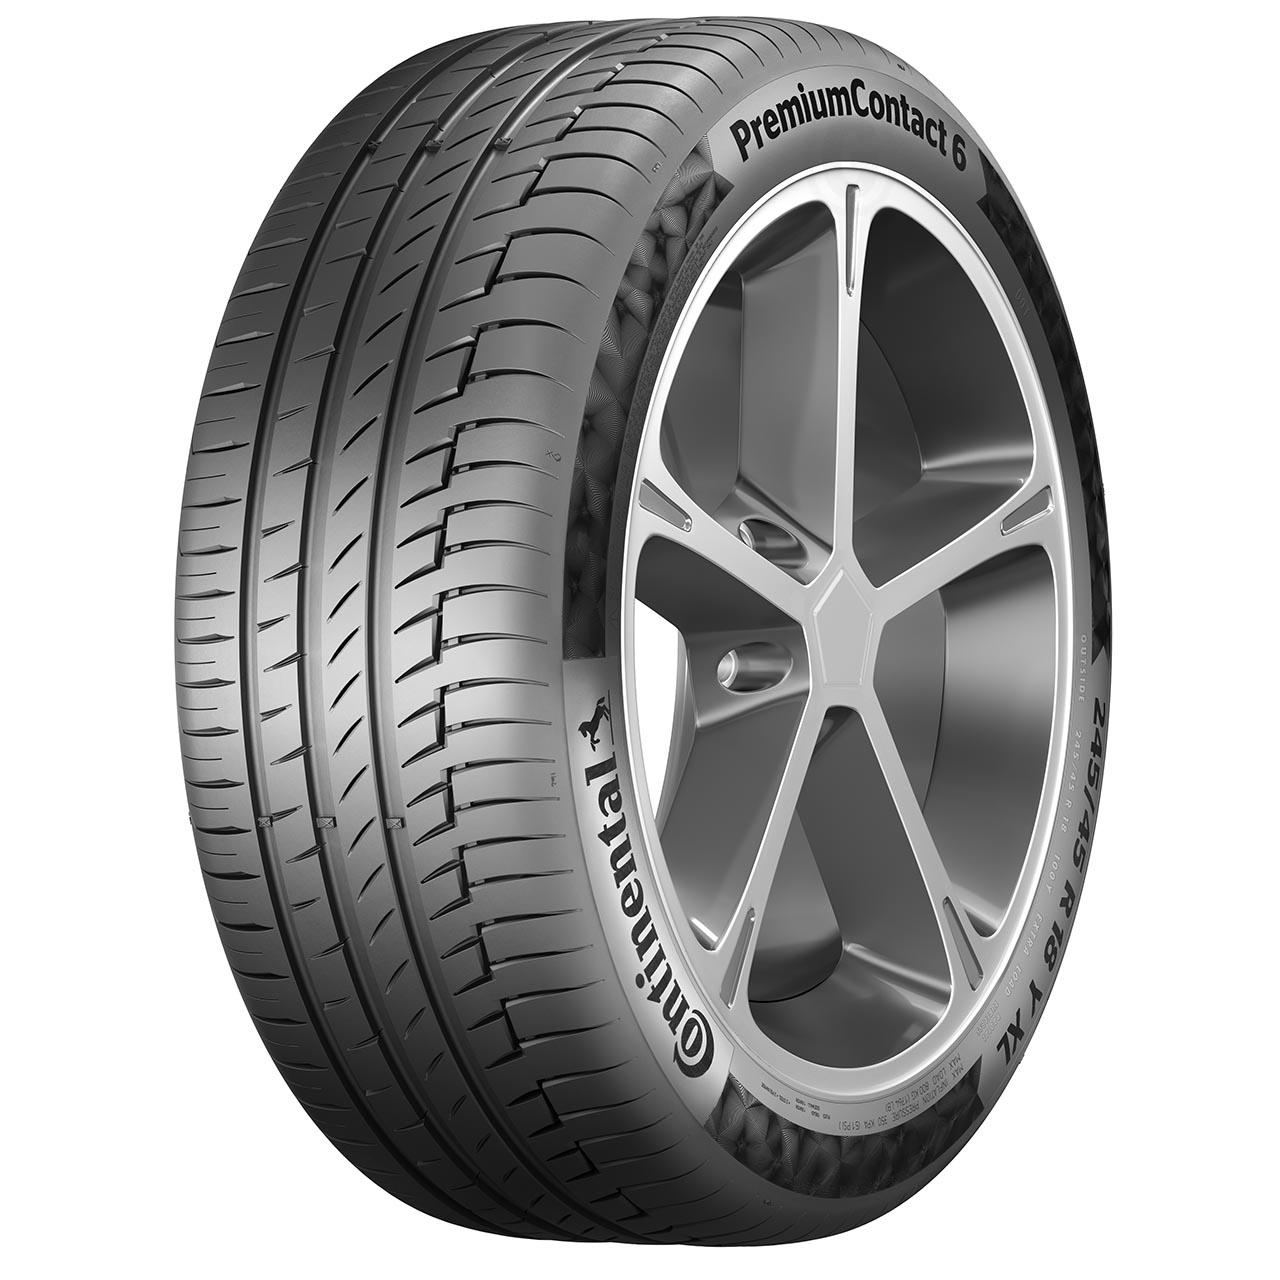 Continental PREMIUMCONTACT 6 255/55R20 110V XL FR FOR